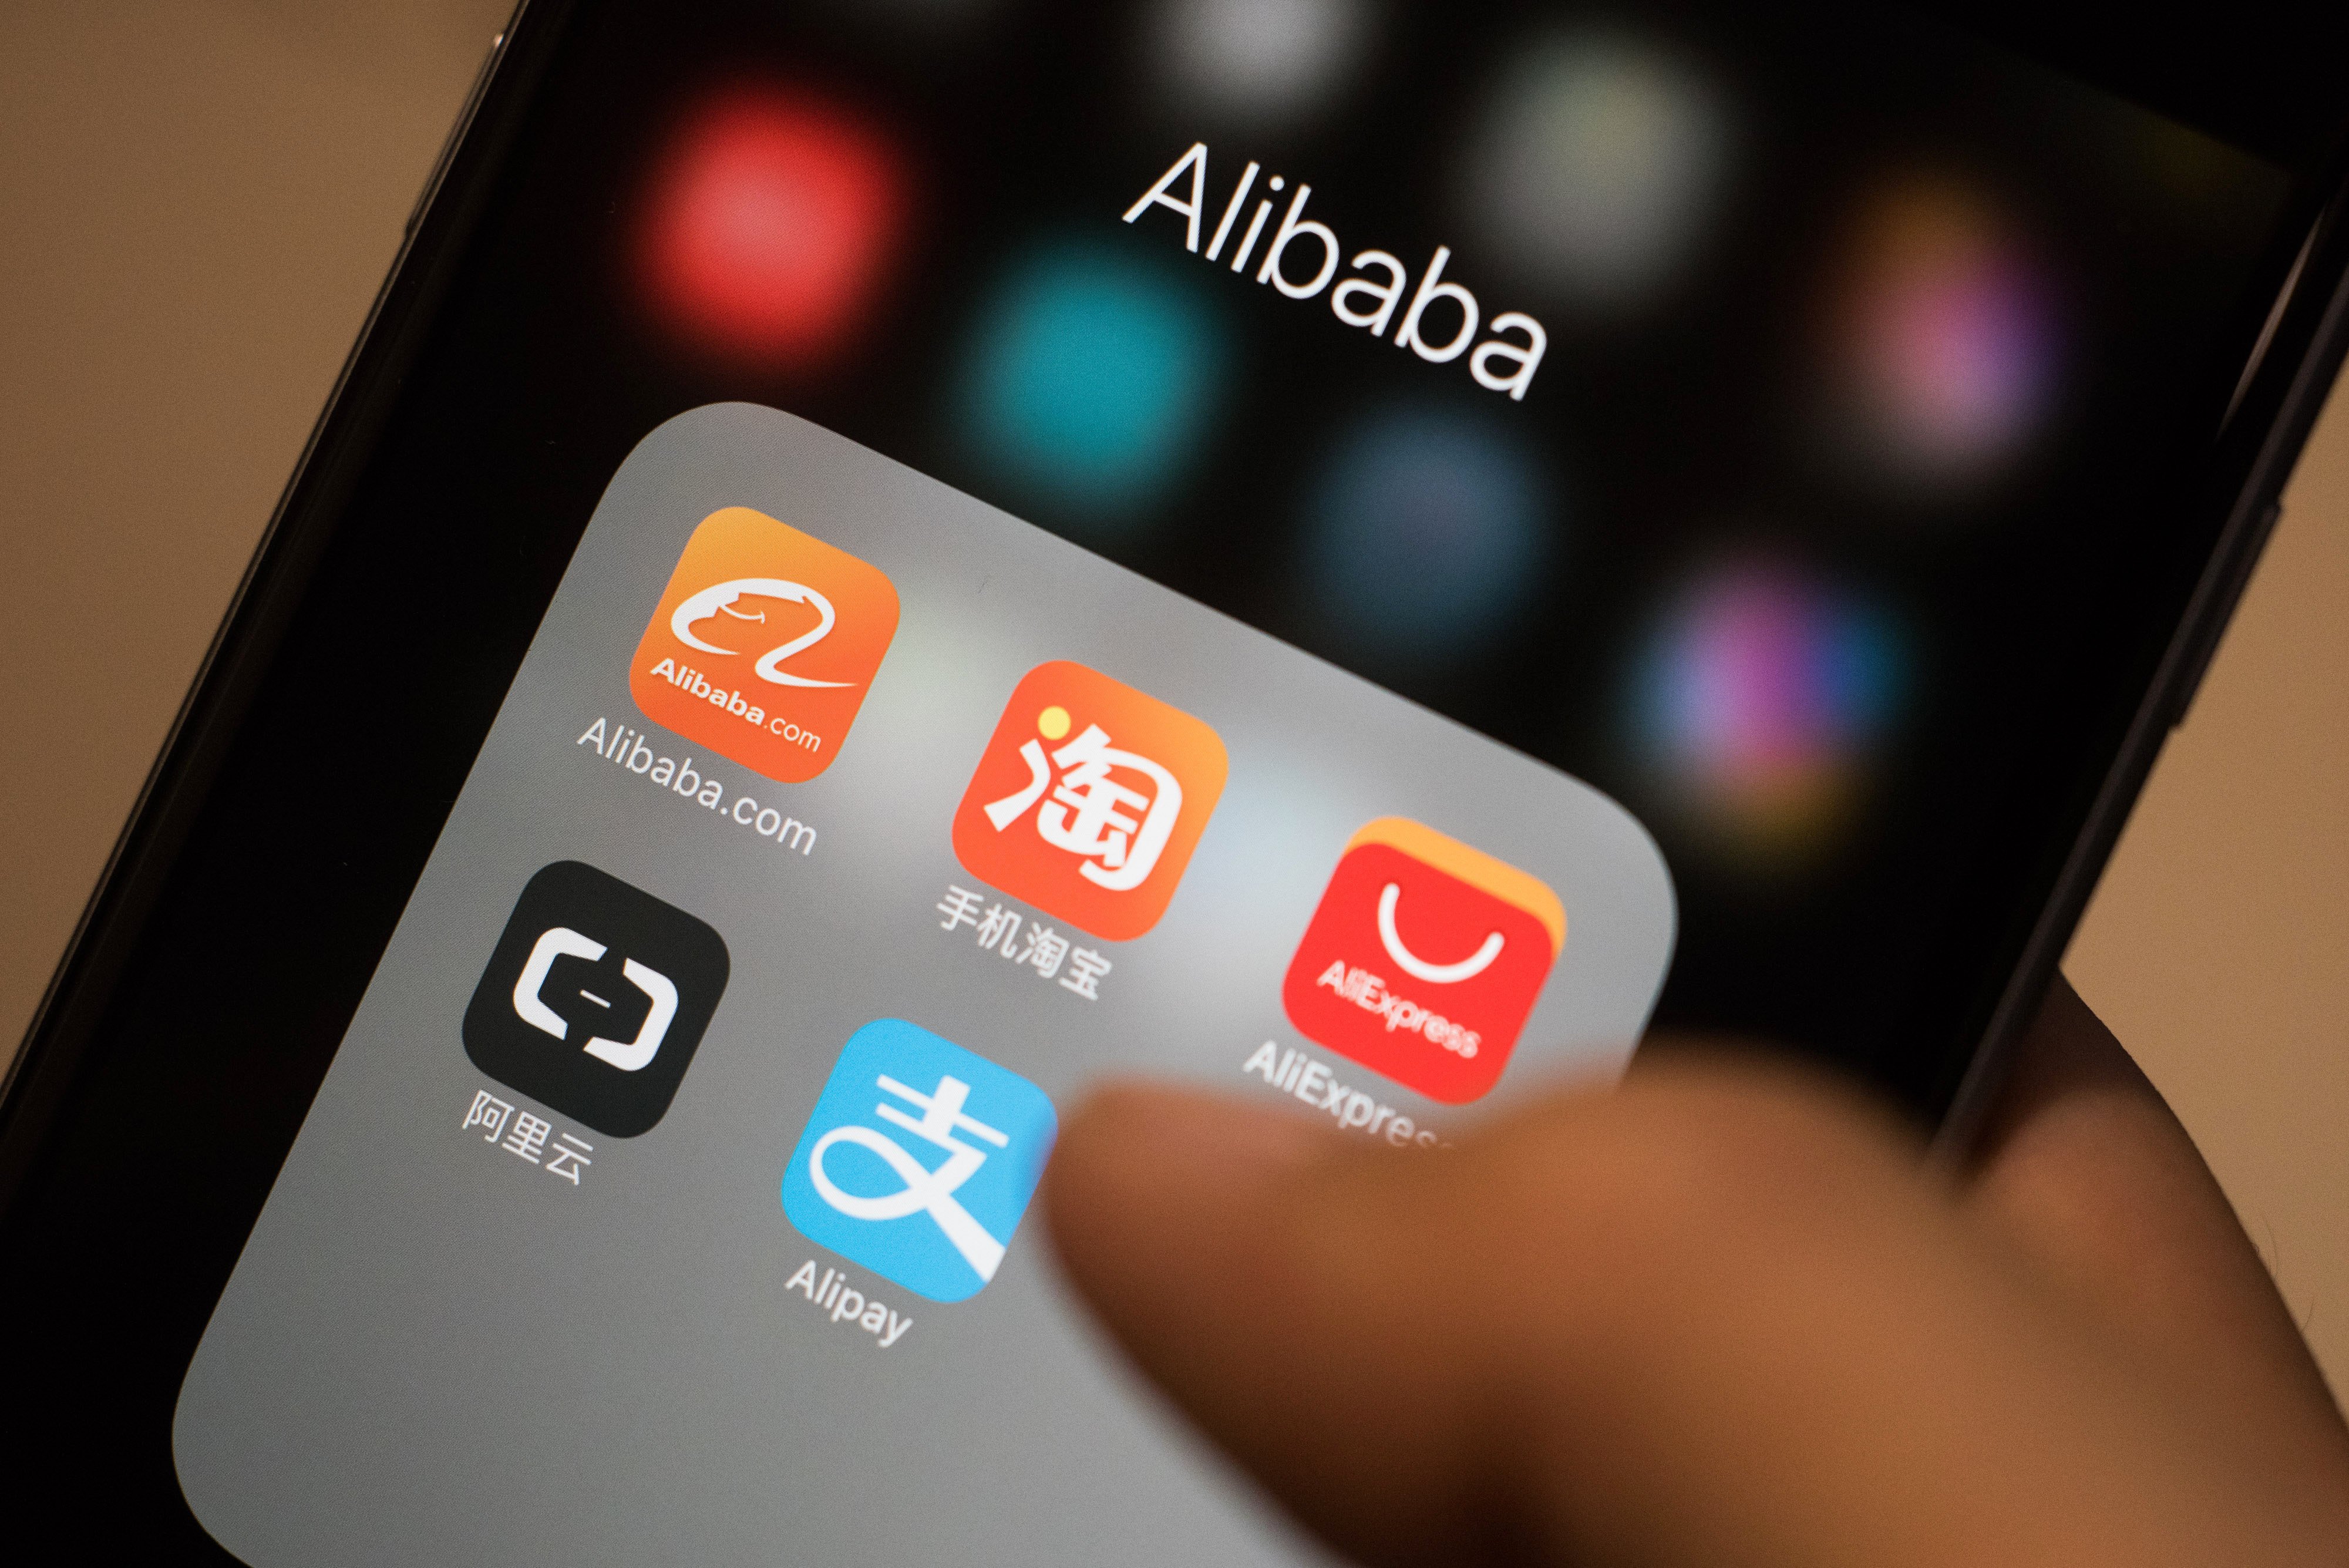 Alibaba.com targets TikTok’s Chinese merchants after regulations force change – South China Morning Post